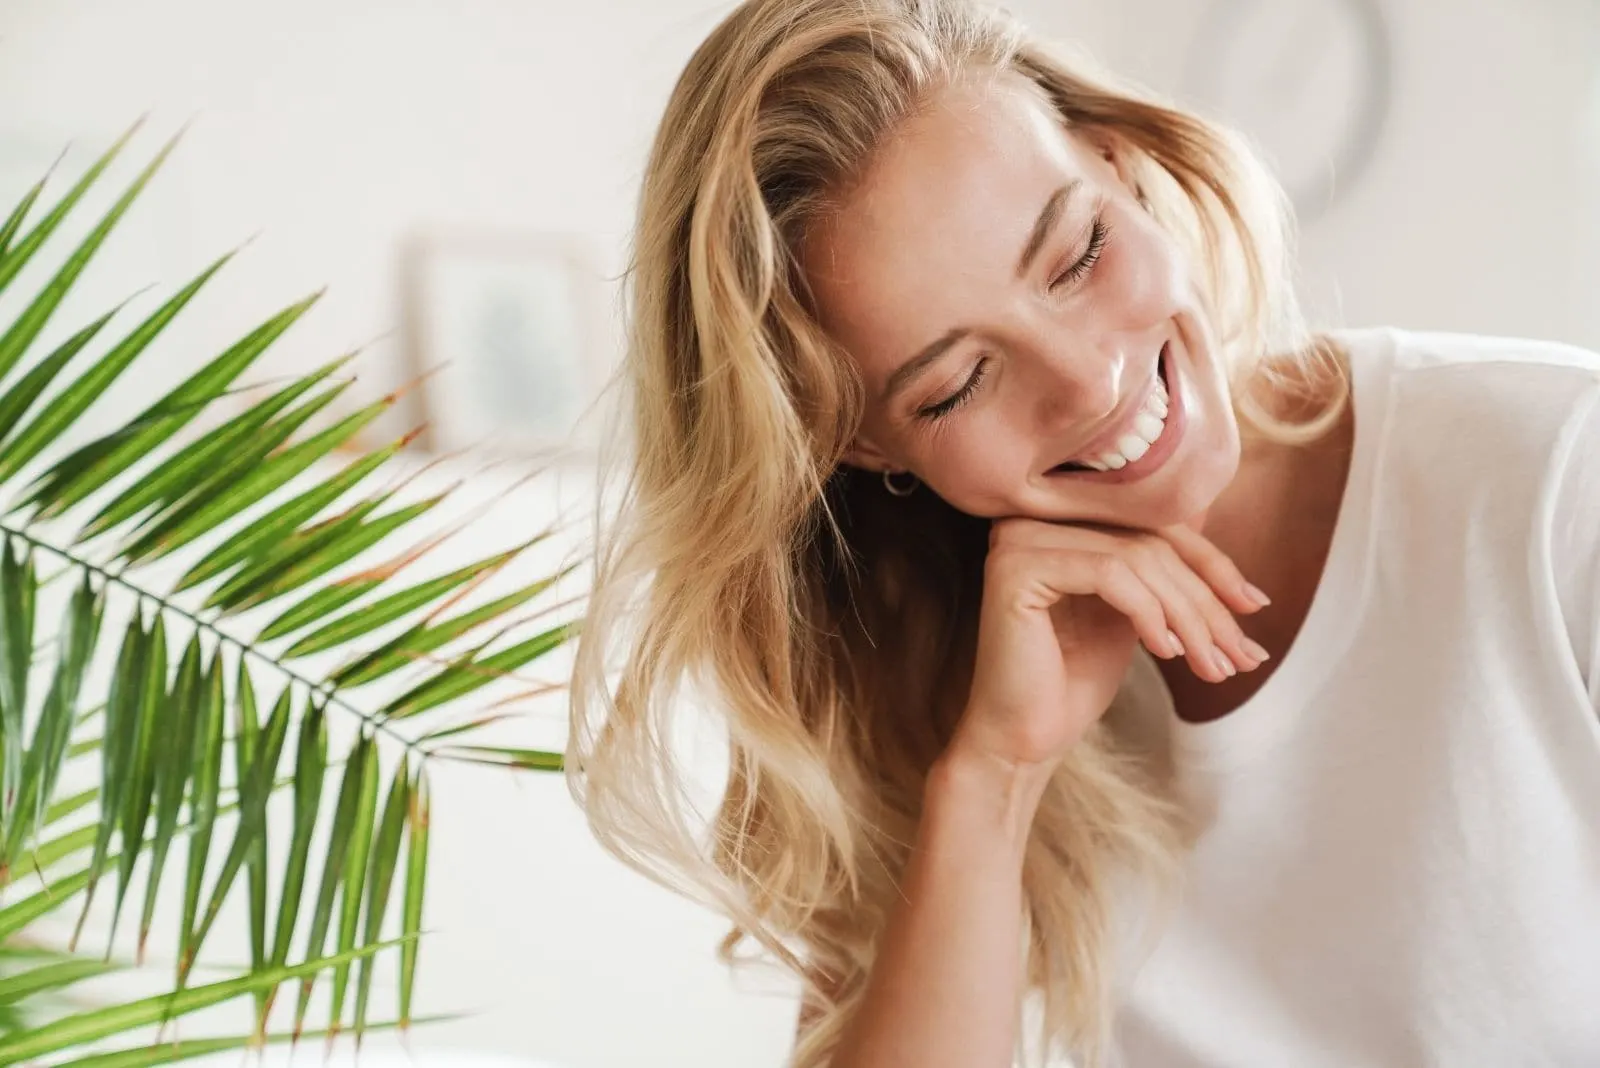 smiling woman closing her eyes sitting inside the living room with plant behind her